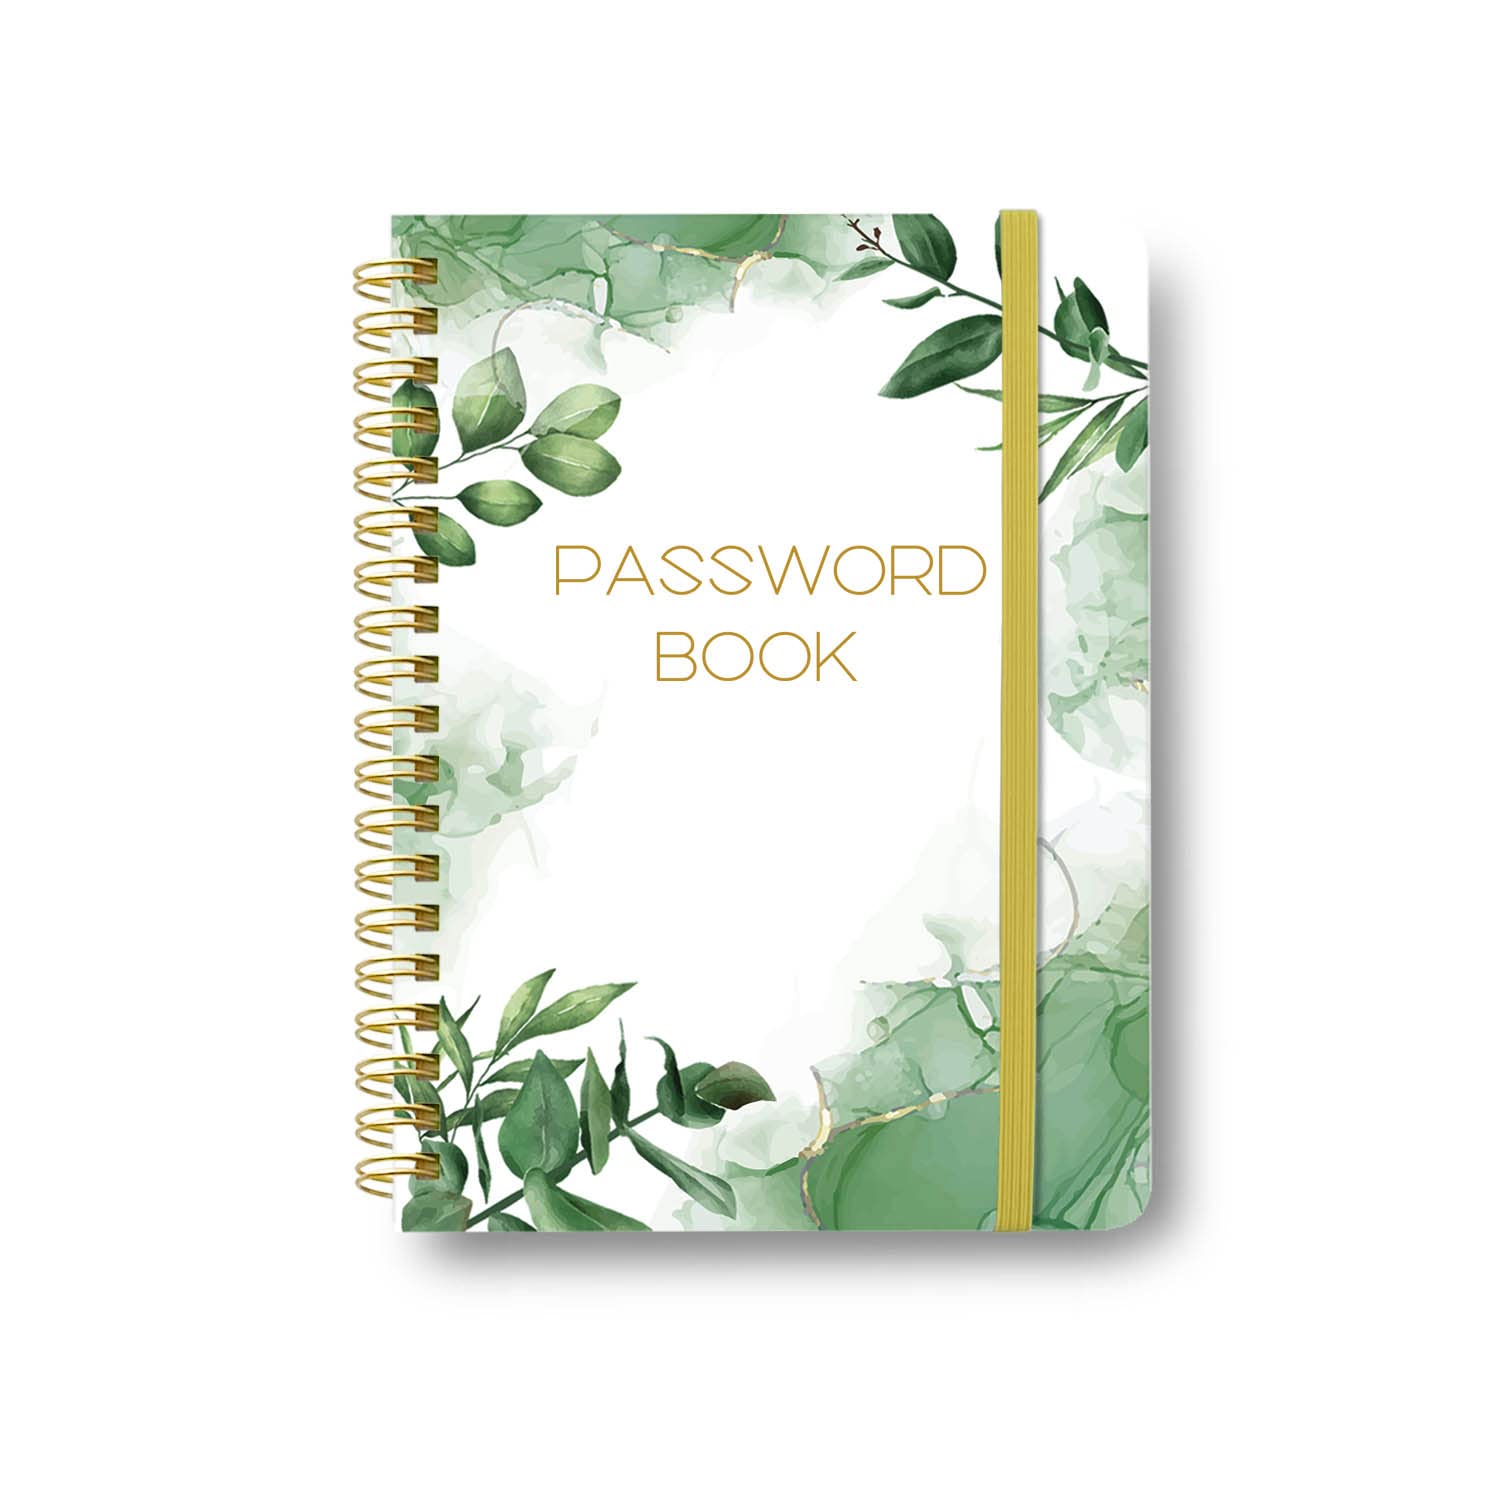 Tiankool Password Book With Alphabetical Tabs - Spiral Password Notebook For Internet & Computer Login, Recording Website, Usernames, Pas